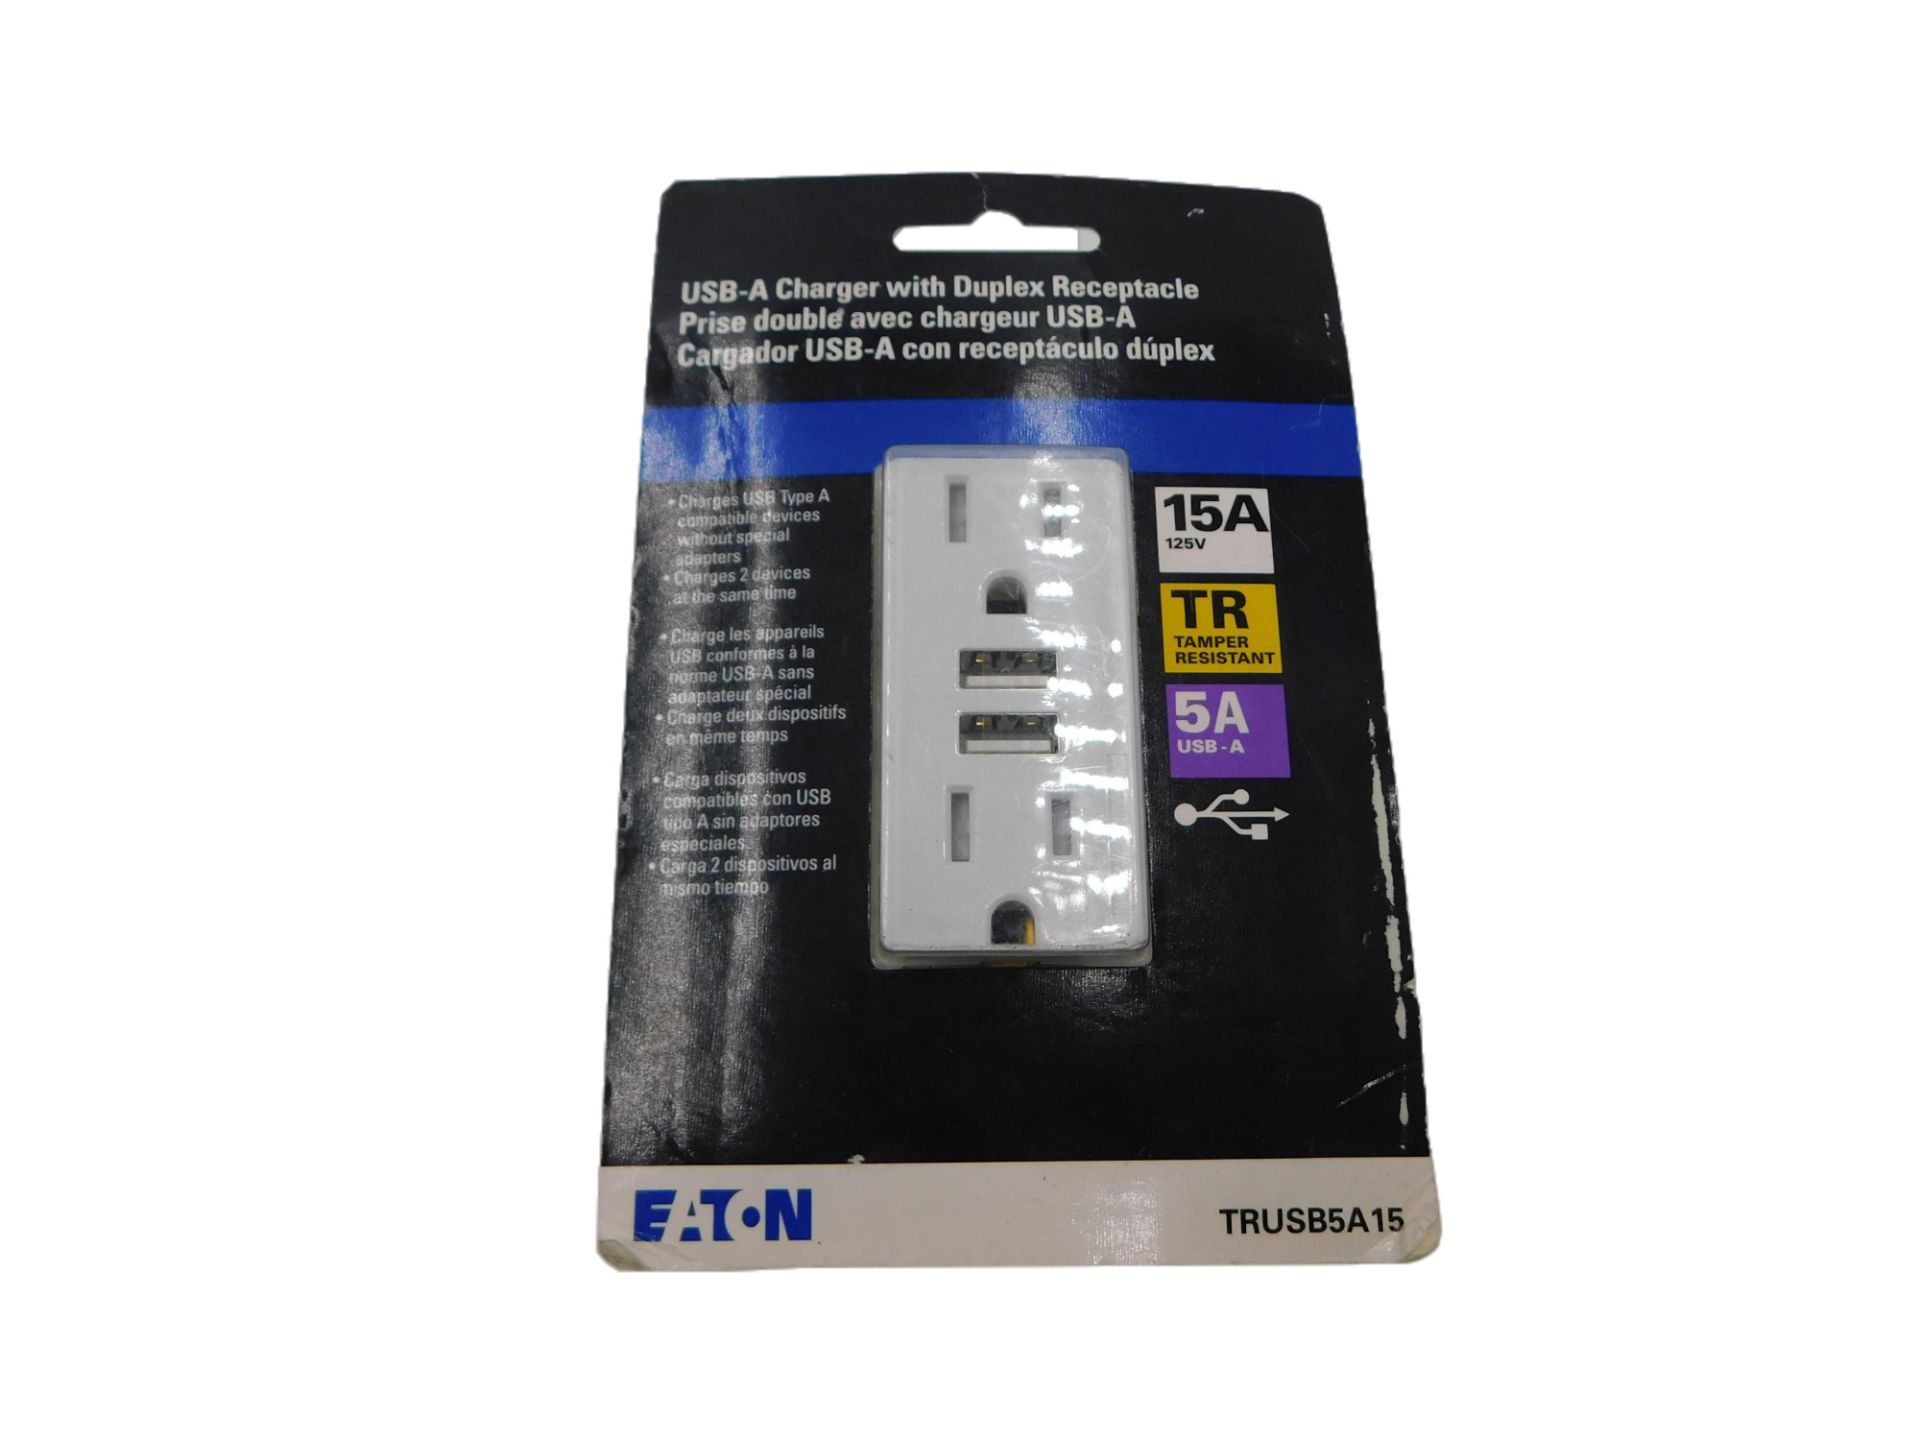 3x Eaton TRUSB5A15W-KB-LW Outlets Combination USB Charger/Duplex Receptacle 15A 125V White EA Tamper